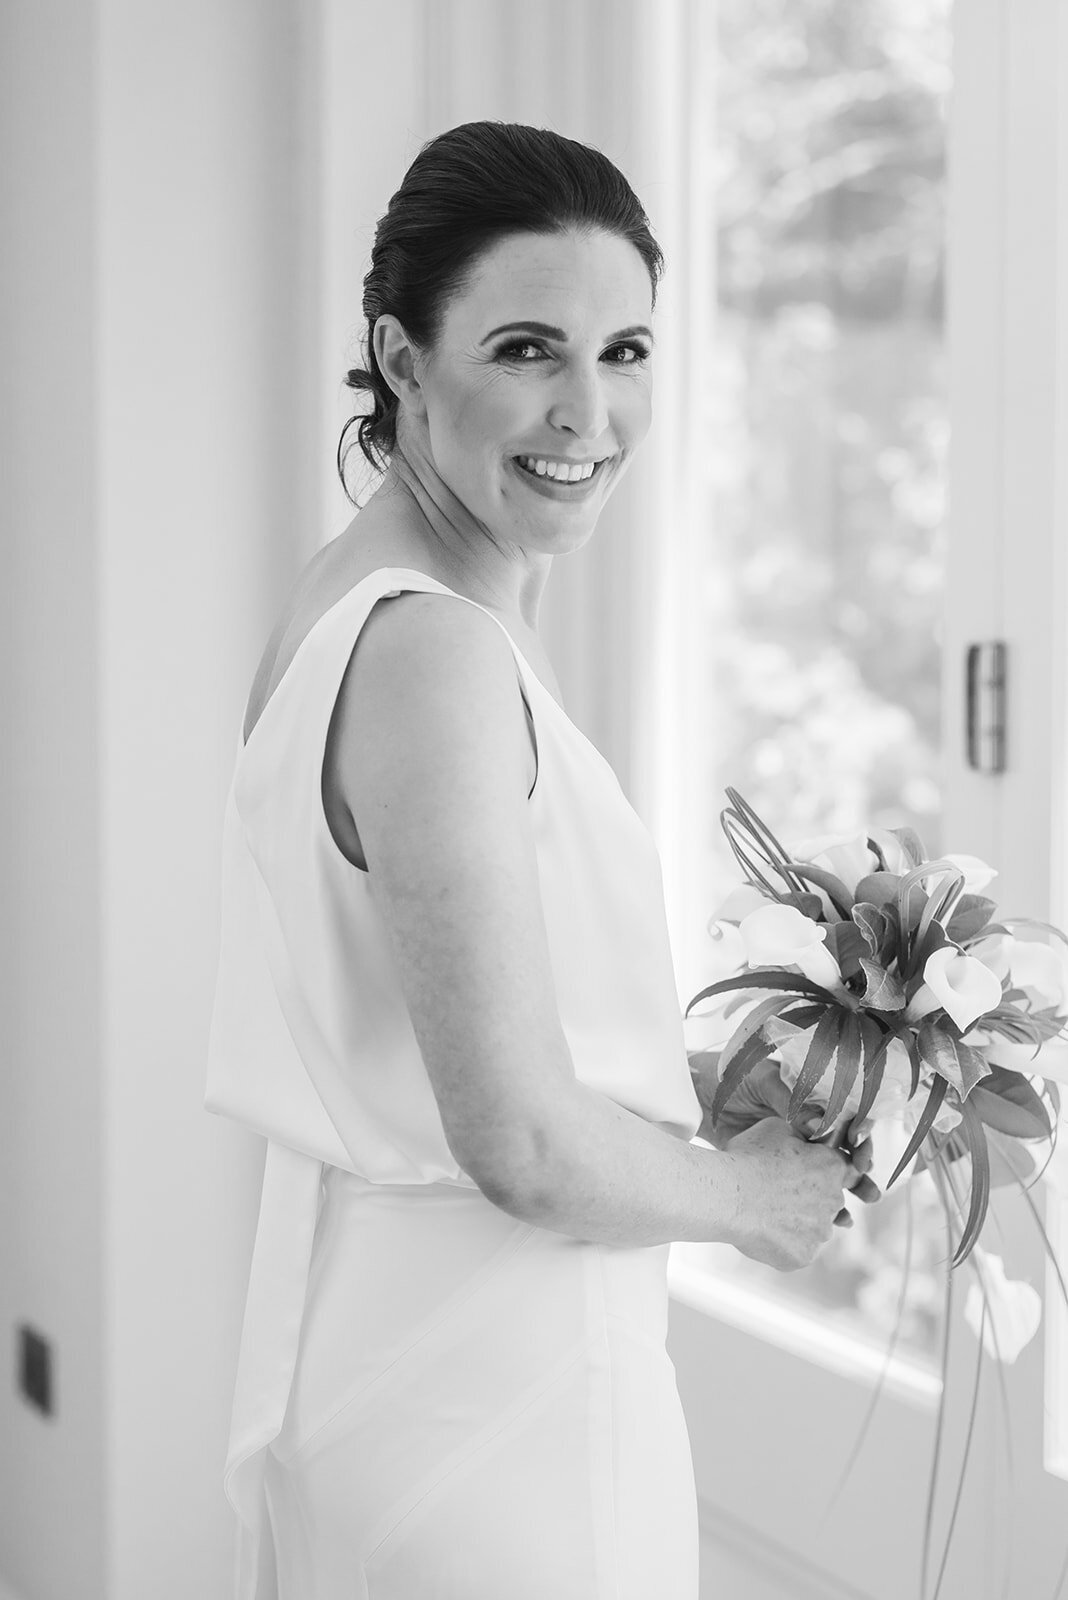 Black and white image of a bride holding her bouquet and smiling at the camera